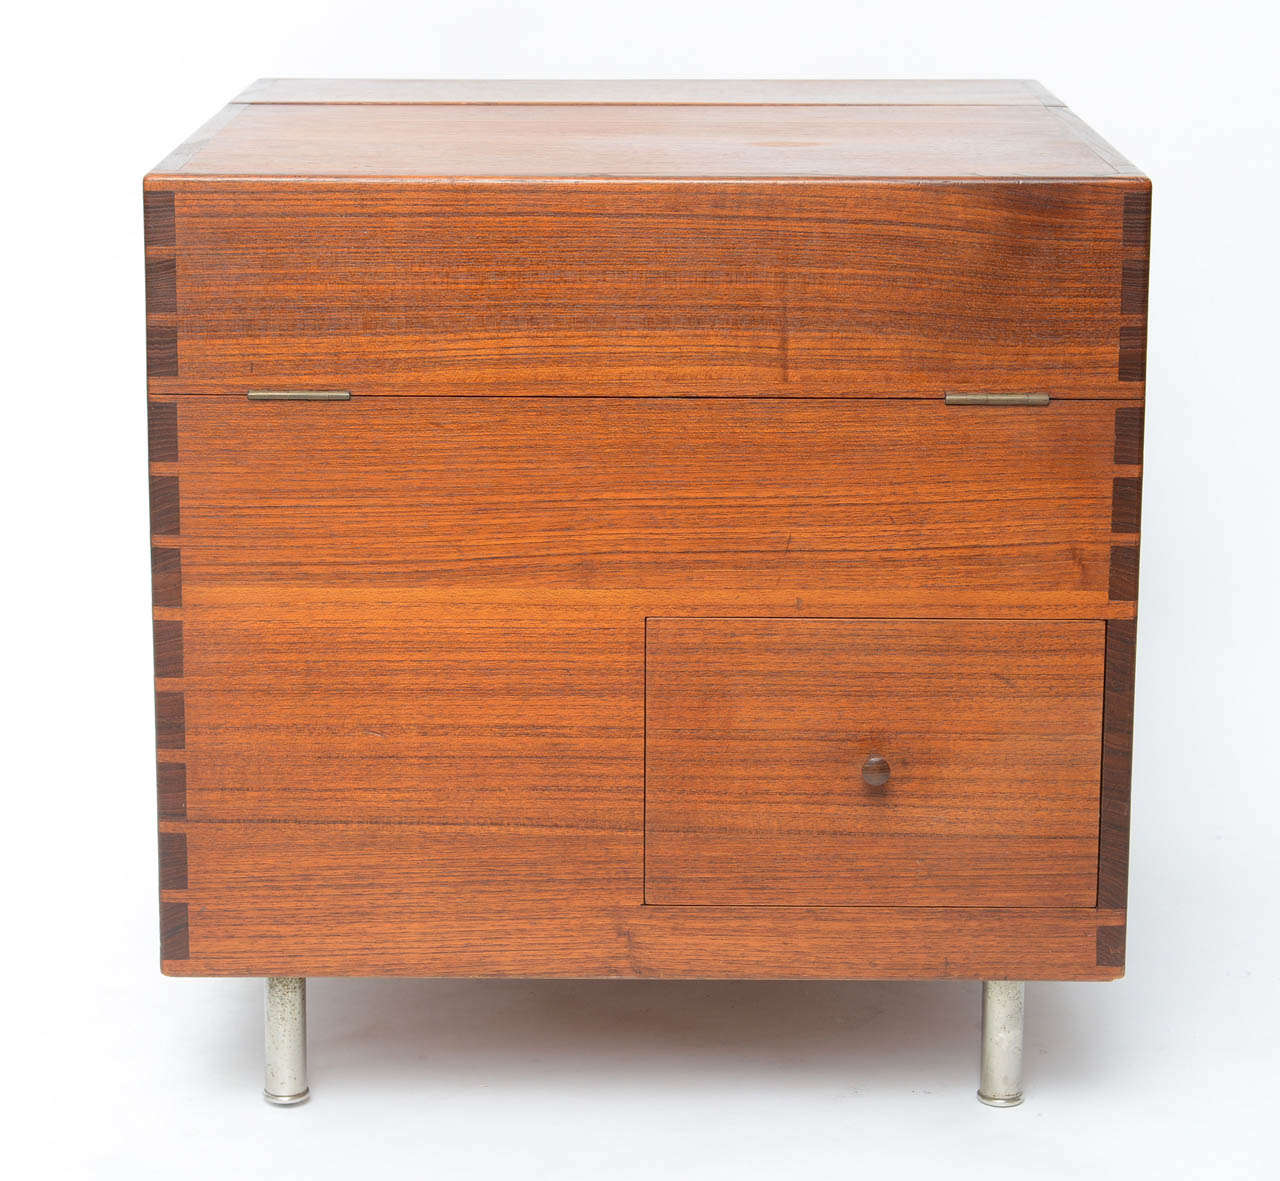 Rare and great design by Hans Wegner.
Bar features one drawer and a hinged top concealing storage.
Signed with branded manufacturer's mark to underside.